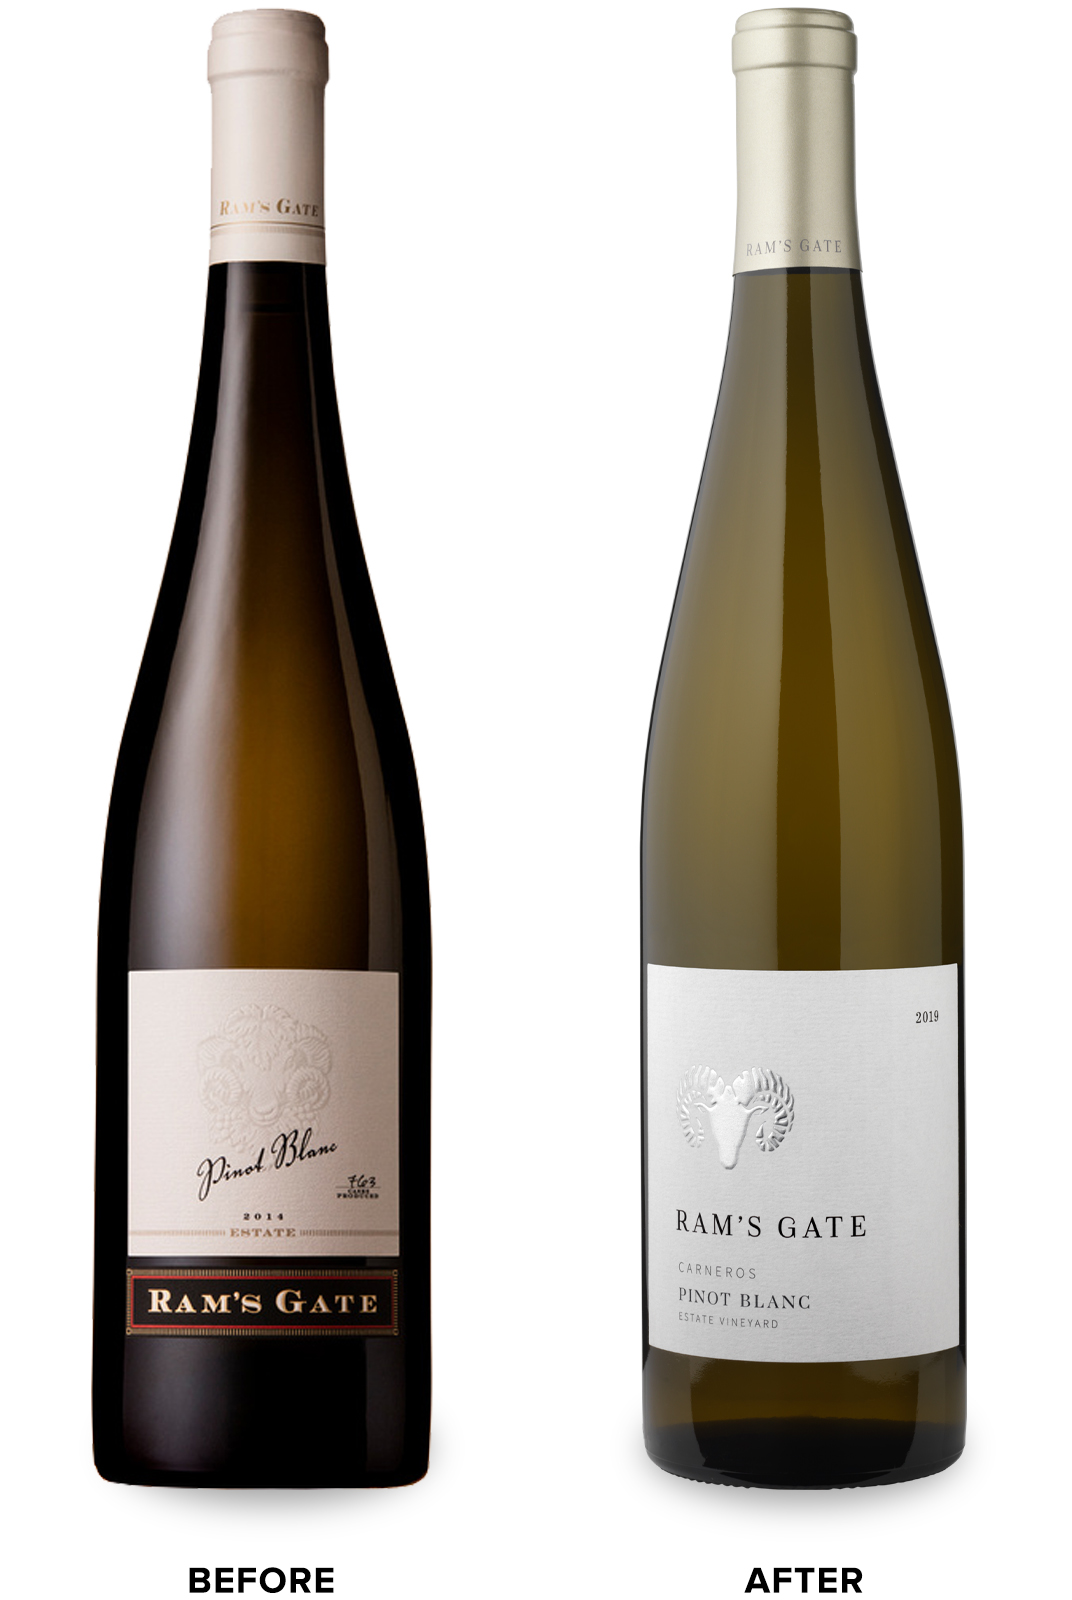 Ram’s Gate Entry Level Wine Packaging Before Redesign on Left & After on Right